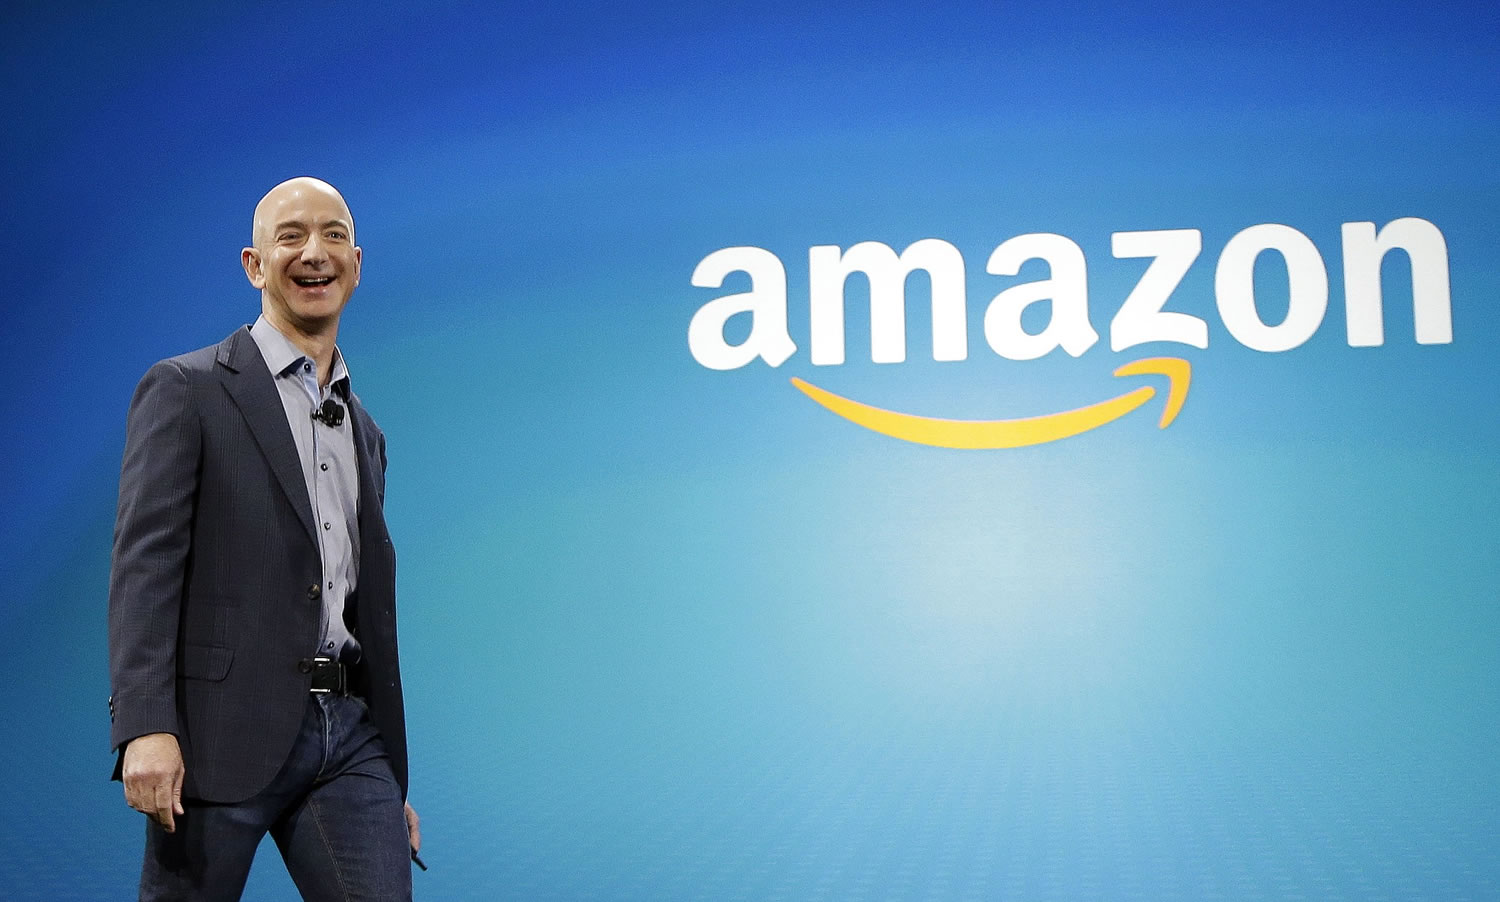 Amazon CEO Jeff Bezos walks on stage June 16 for the launch of the new Amazon Fire Phone, in Seattle.